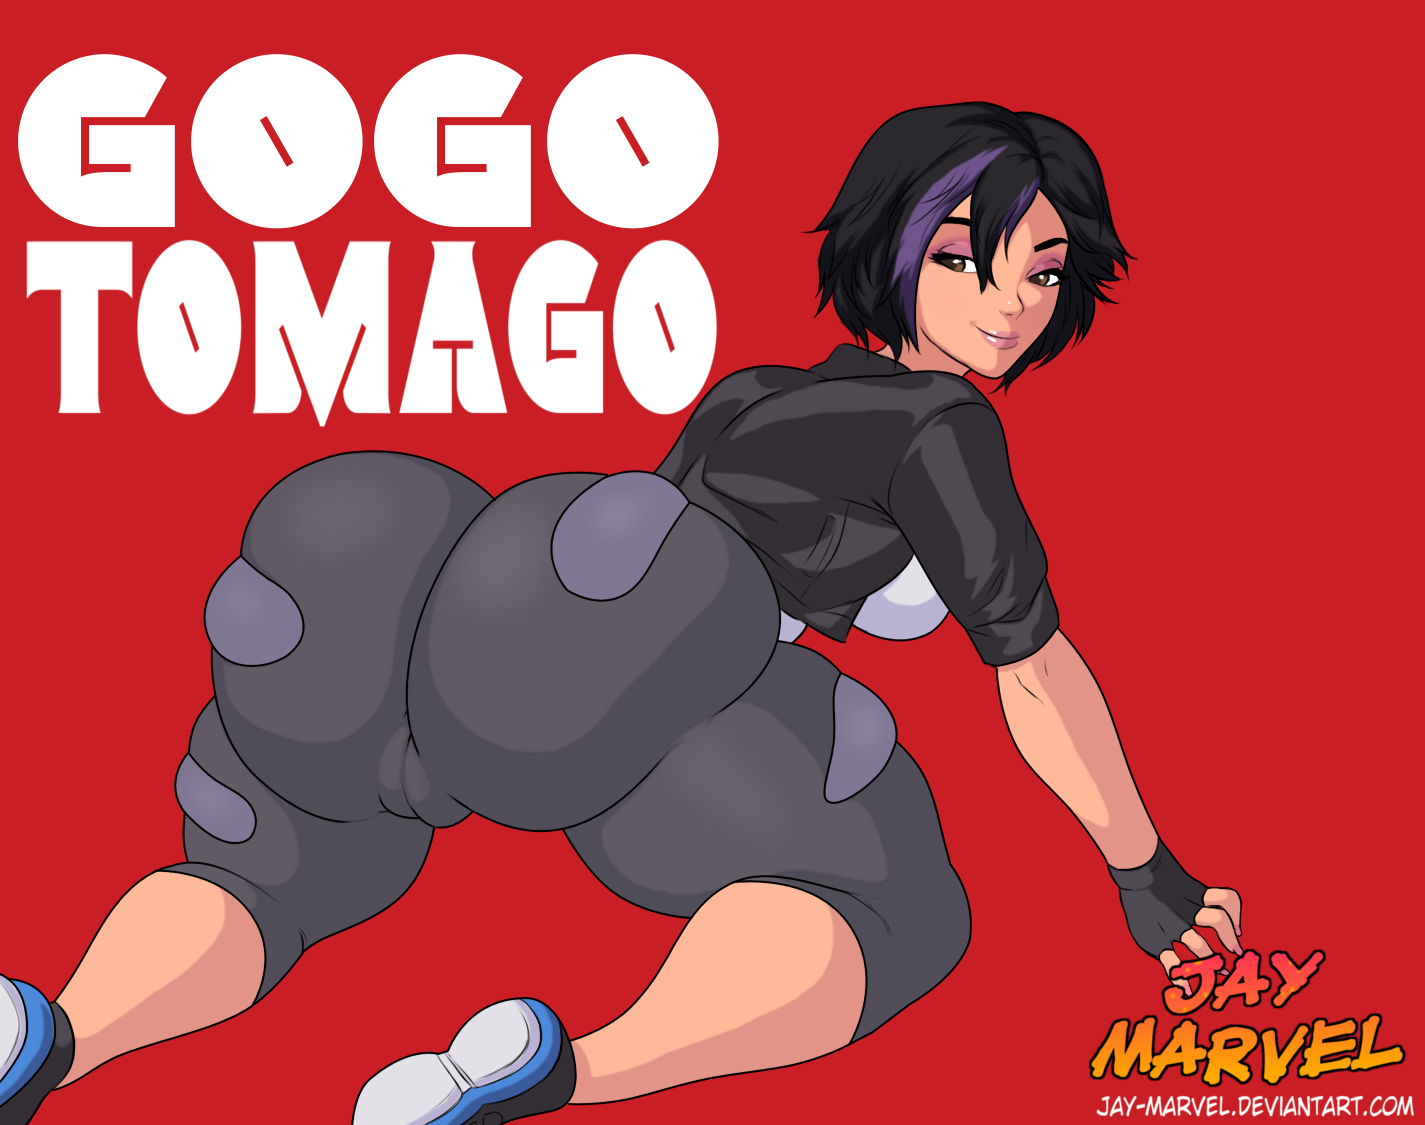 Gogo_Tomago_by_Jay-Marvel.png.